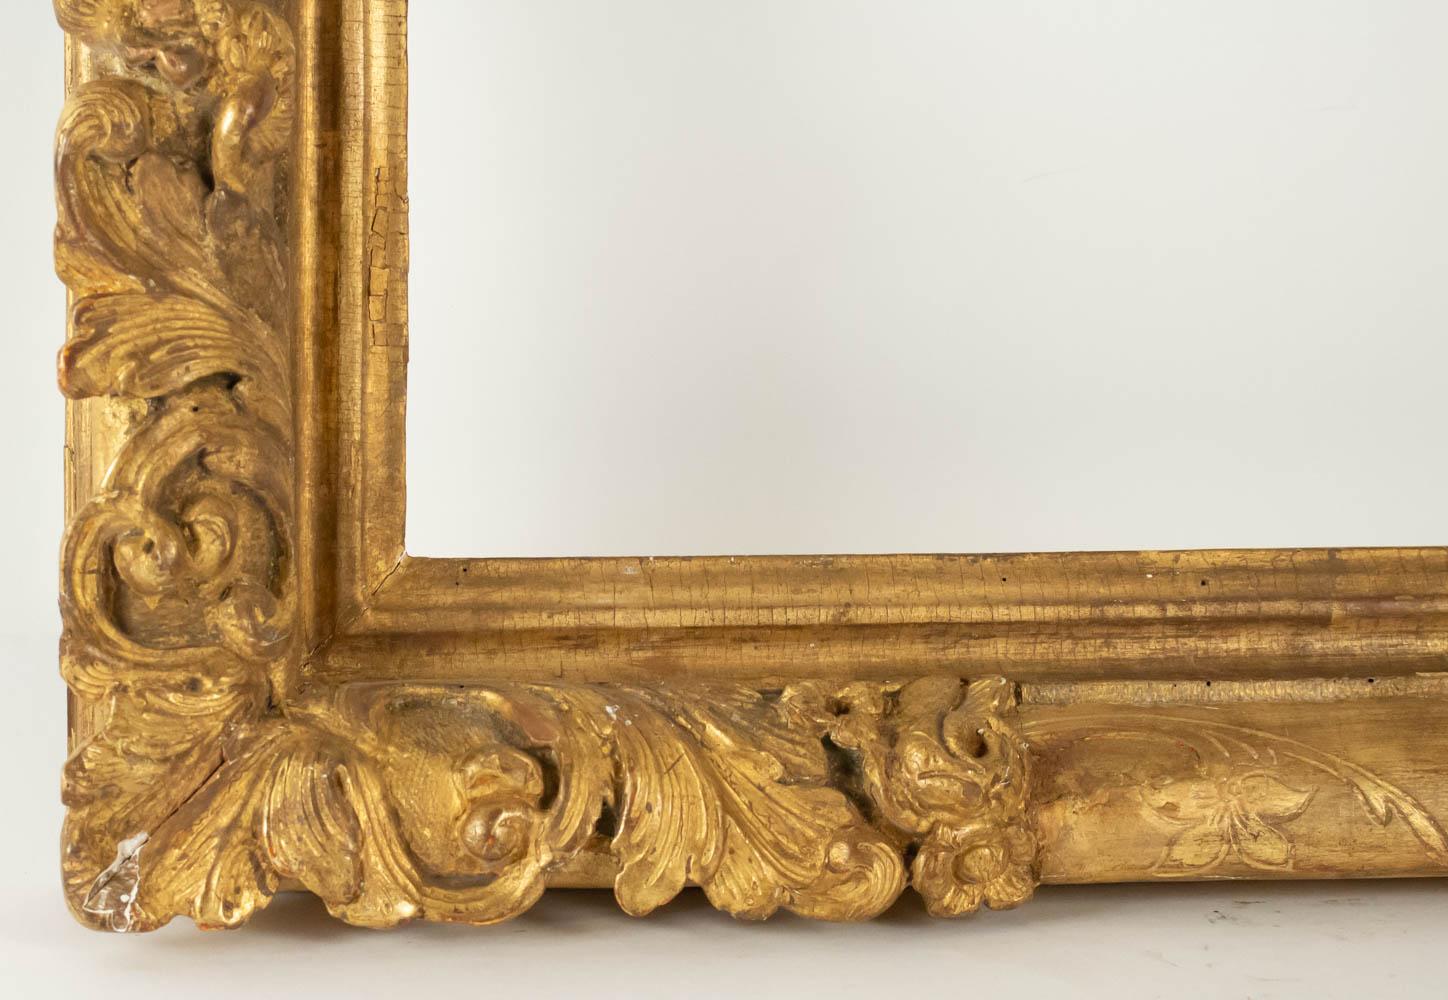 Fabulous Louis XIV period hand-carved giltwood frame - mirror with flower corners, France, late 17th-early 18th century.
Sight size is: 61.5 cm x 61.5 cm
Overall size is: 78 cm x 78 cm.
 